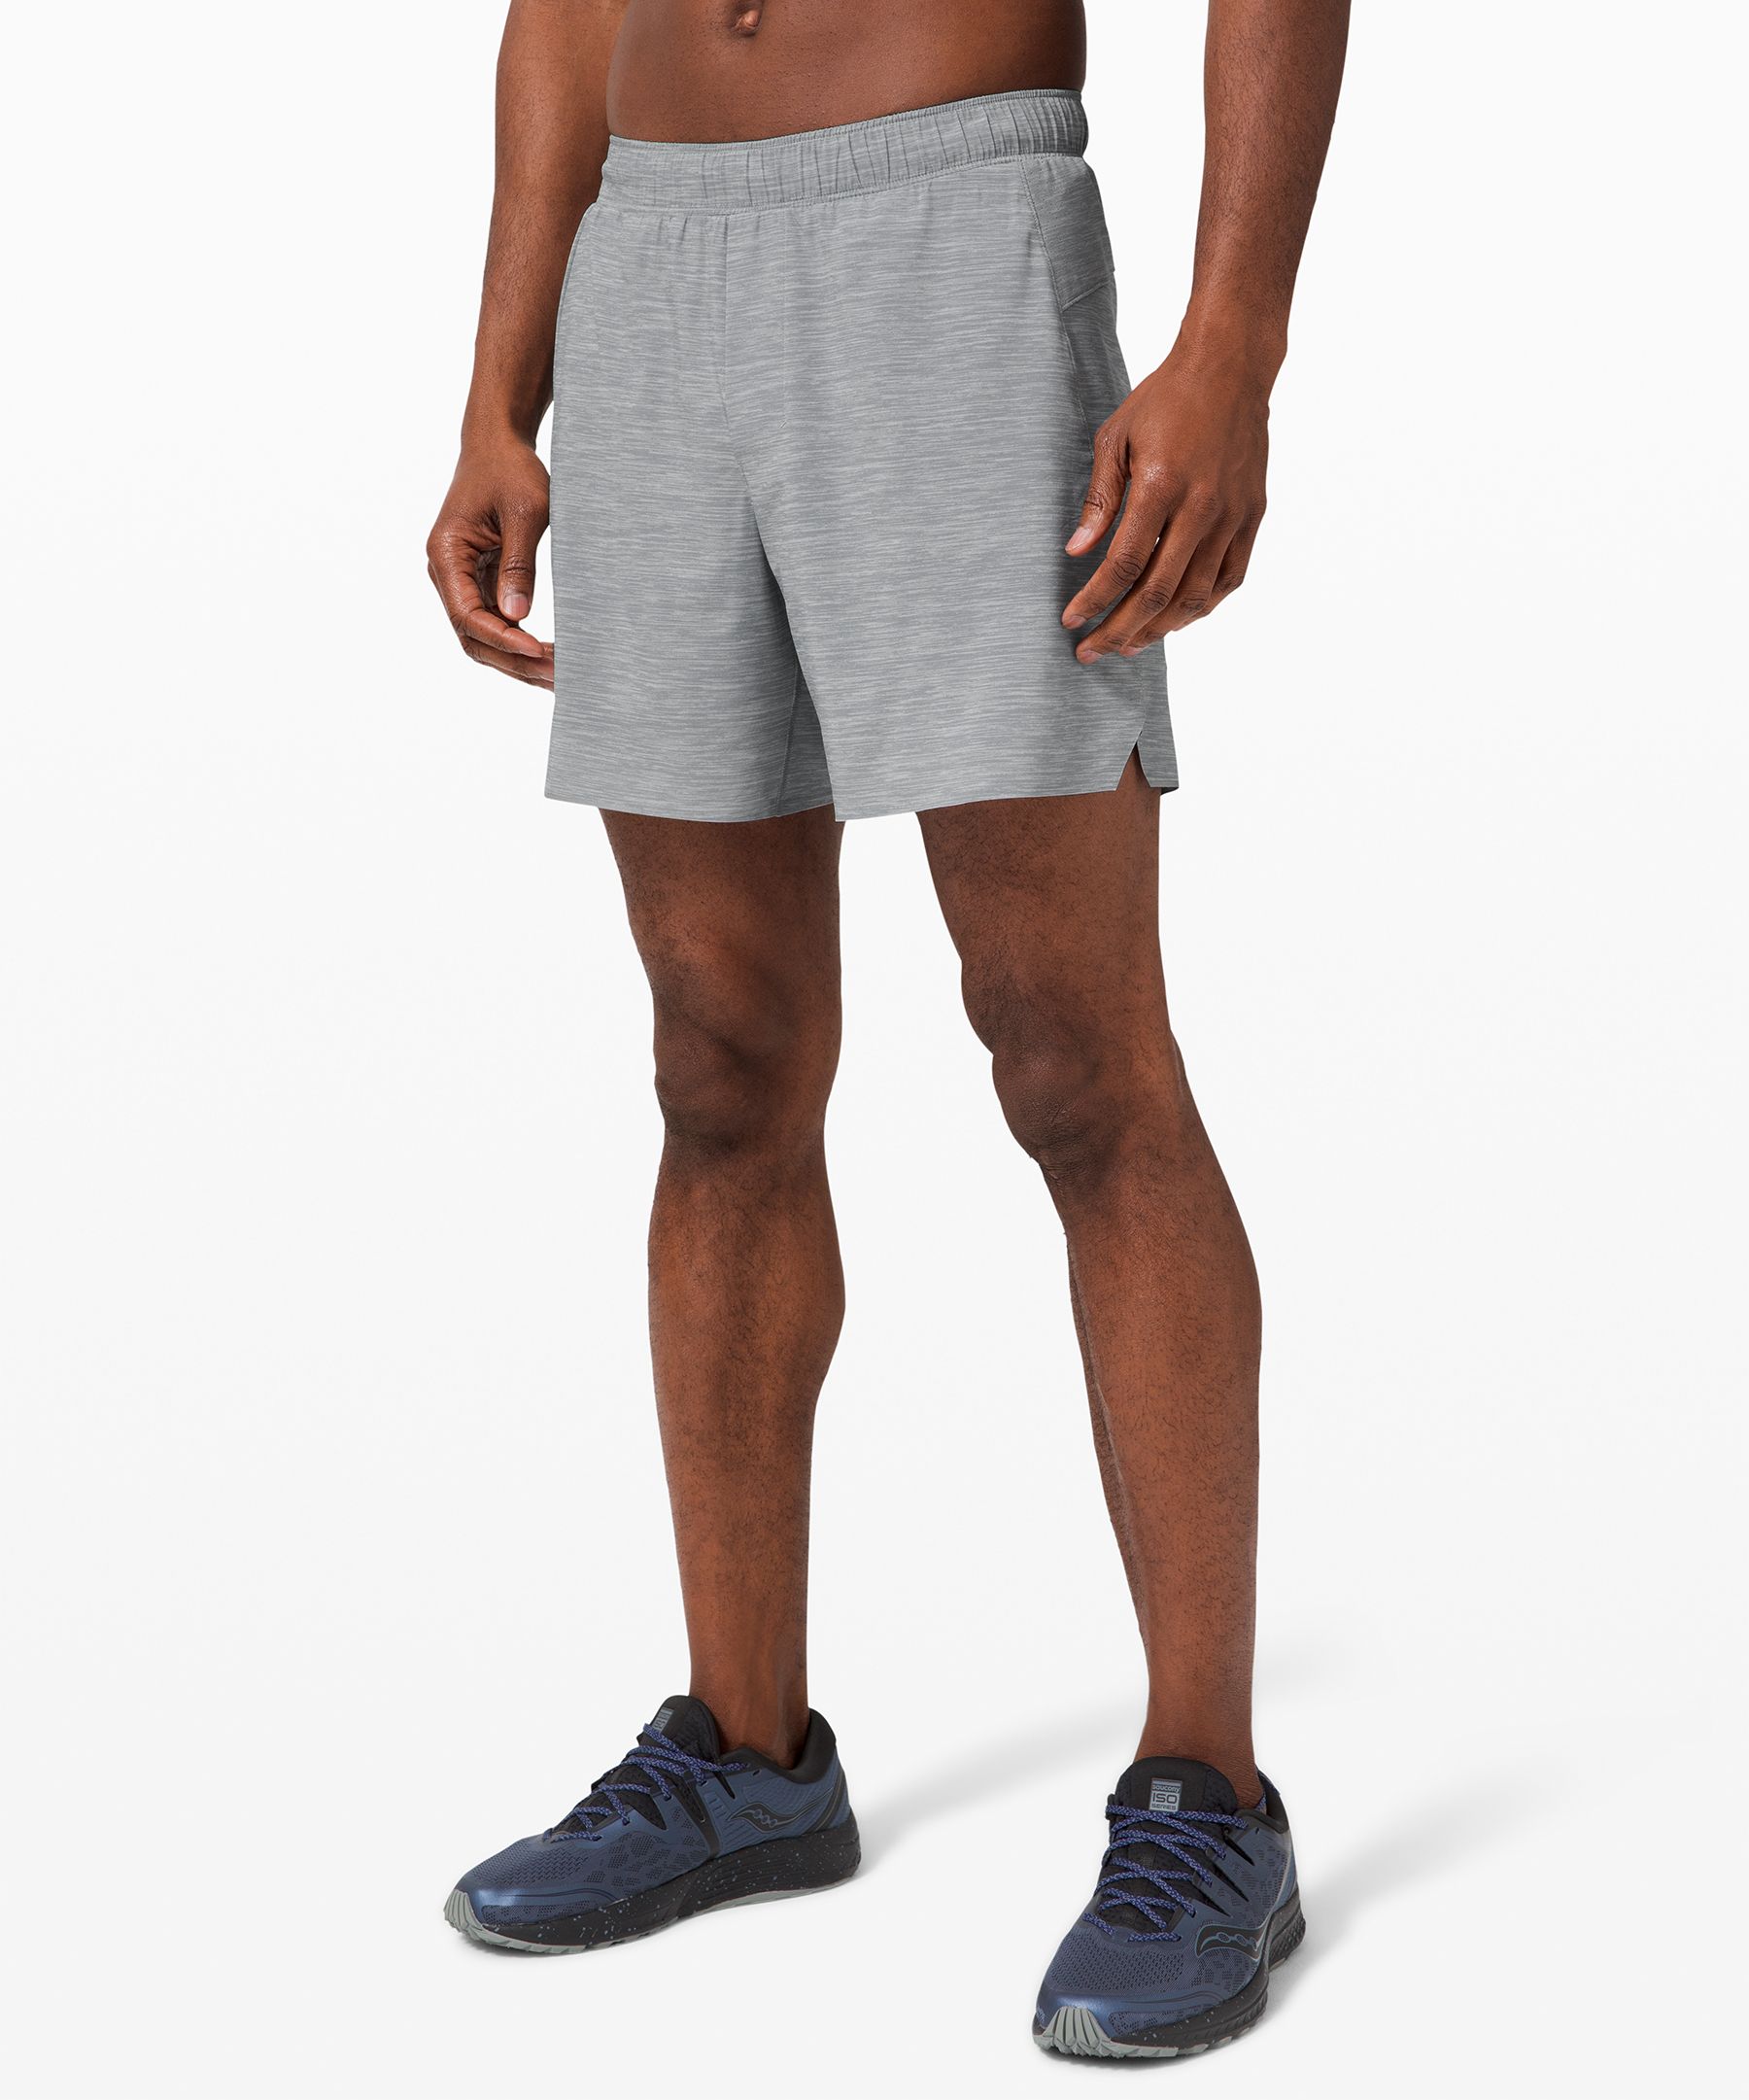 Lululemon Align Shorts 6 Review  International Society of Precision  Agriculture